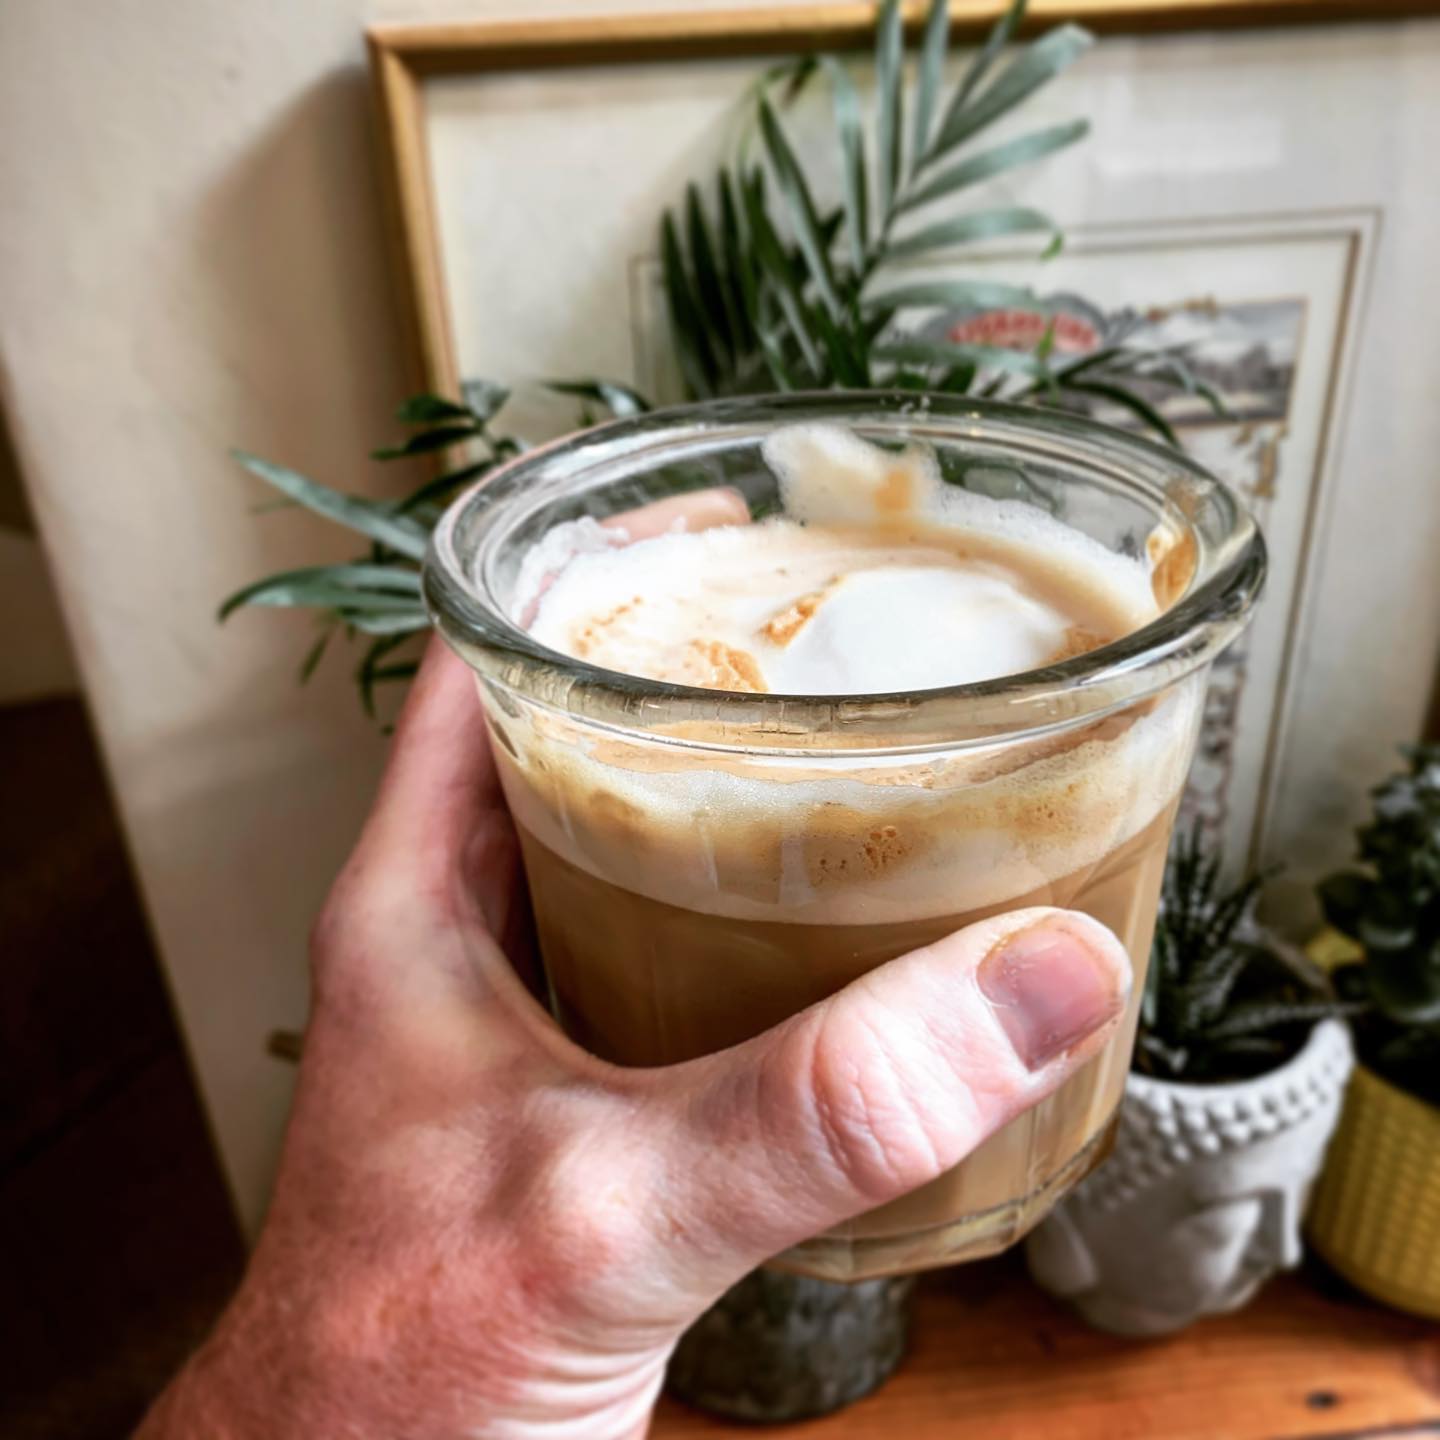 Tweed makes the best Hazelnut Soya Lattes! Lovely start to a busy day of work! ...#coffeehouse #cafe #home #HQ #workingfromhome #littlethings #dairyfree